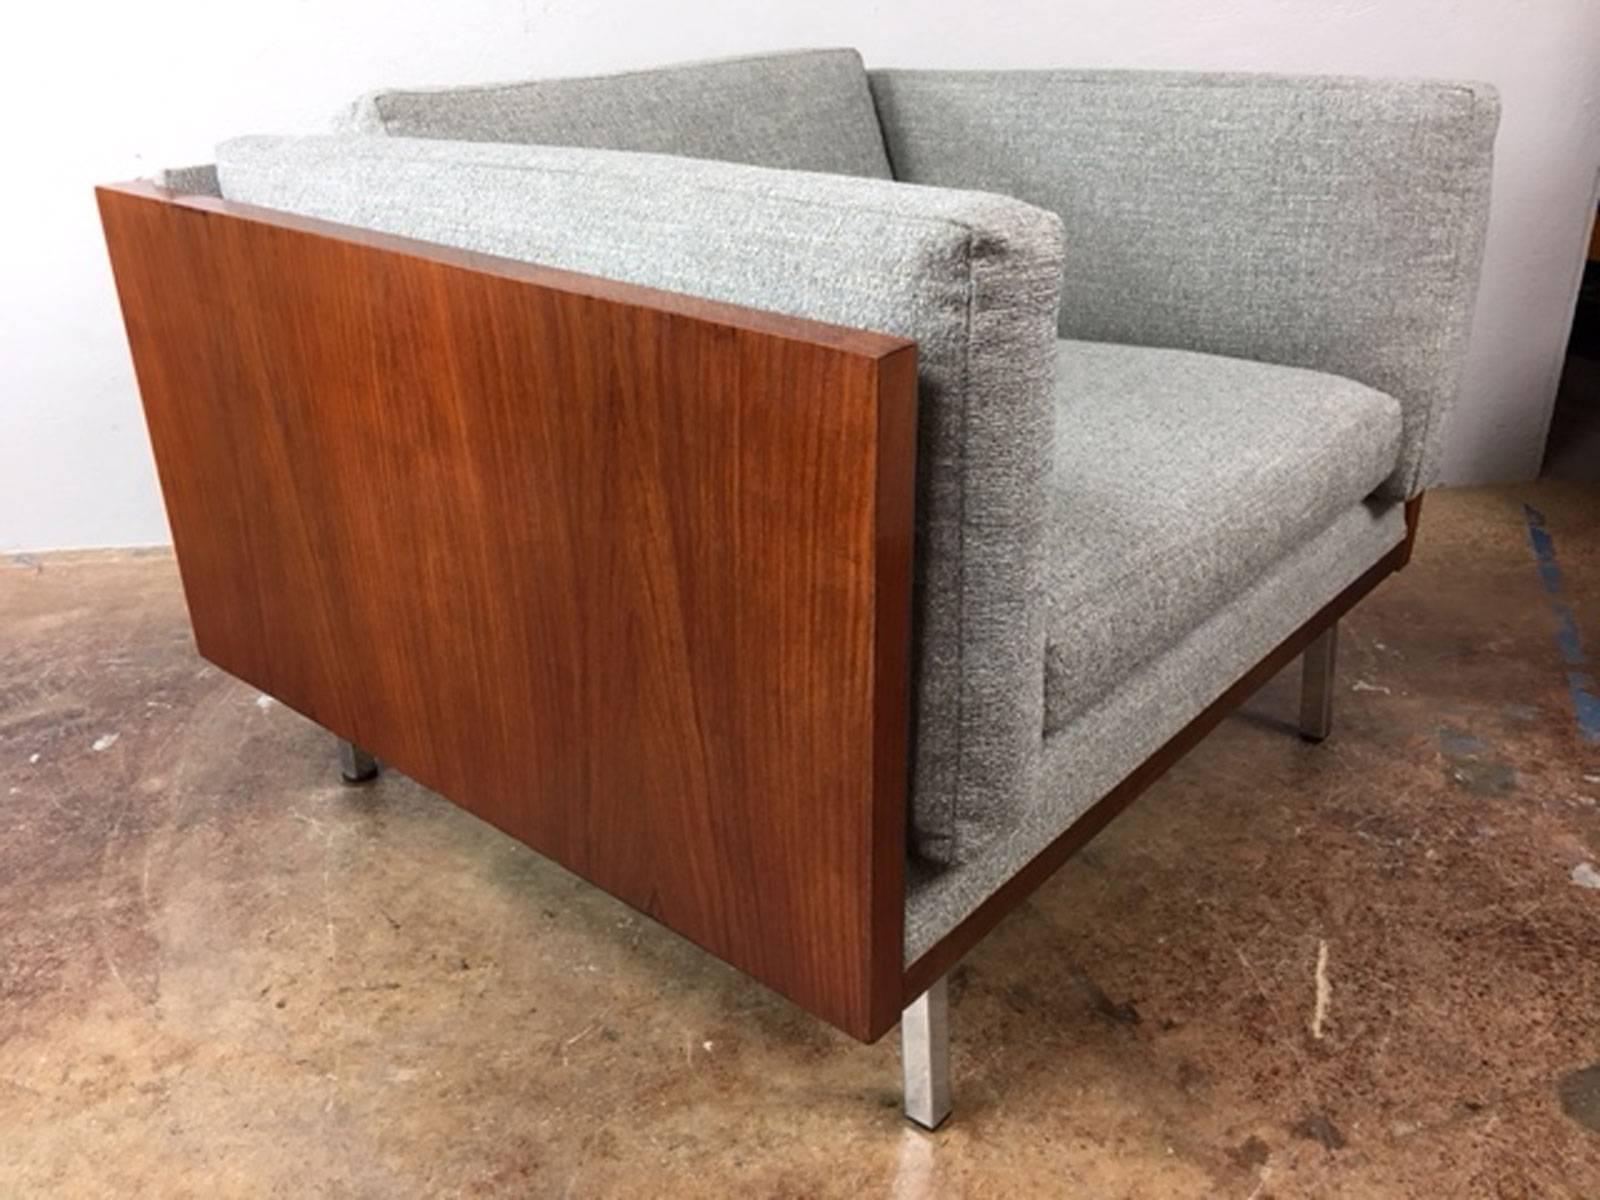 Unique rosewood wrapped low back cube chair with chrome legs by Komfort of Denmark. Rare. New upholstery.  Circa 1970s.

Measures: Seat height is 16